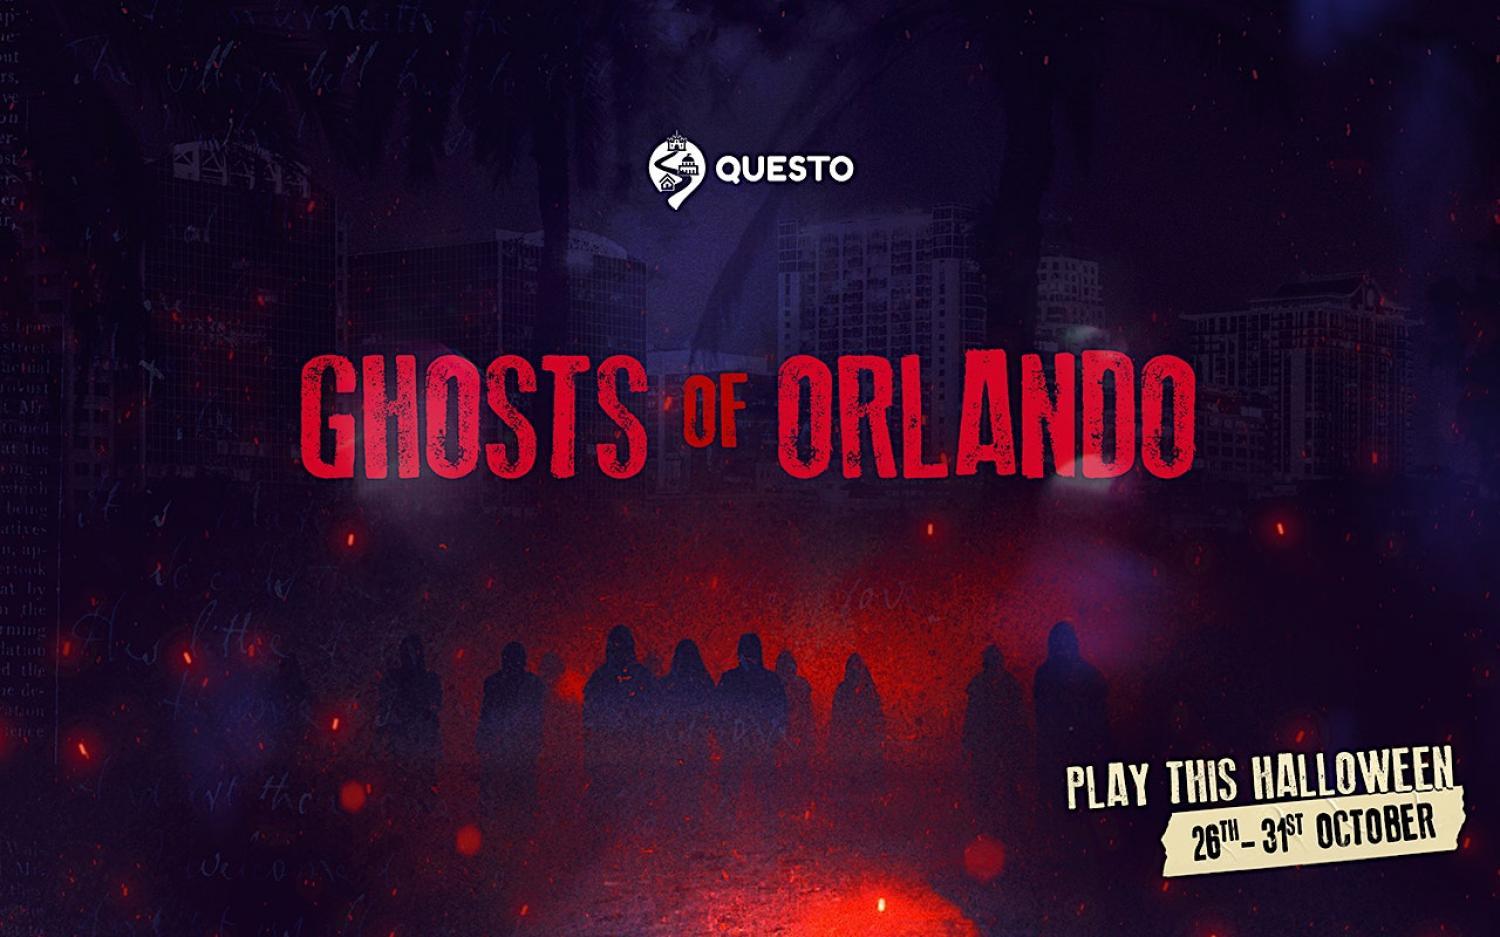 Ghosts of Orlando: Night Walk of the Damned
Wed Oct 26, 10:00 AM - Mon Oct 31, 11:30 PM
in 6 days